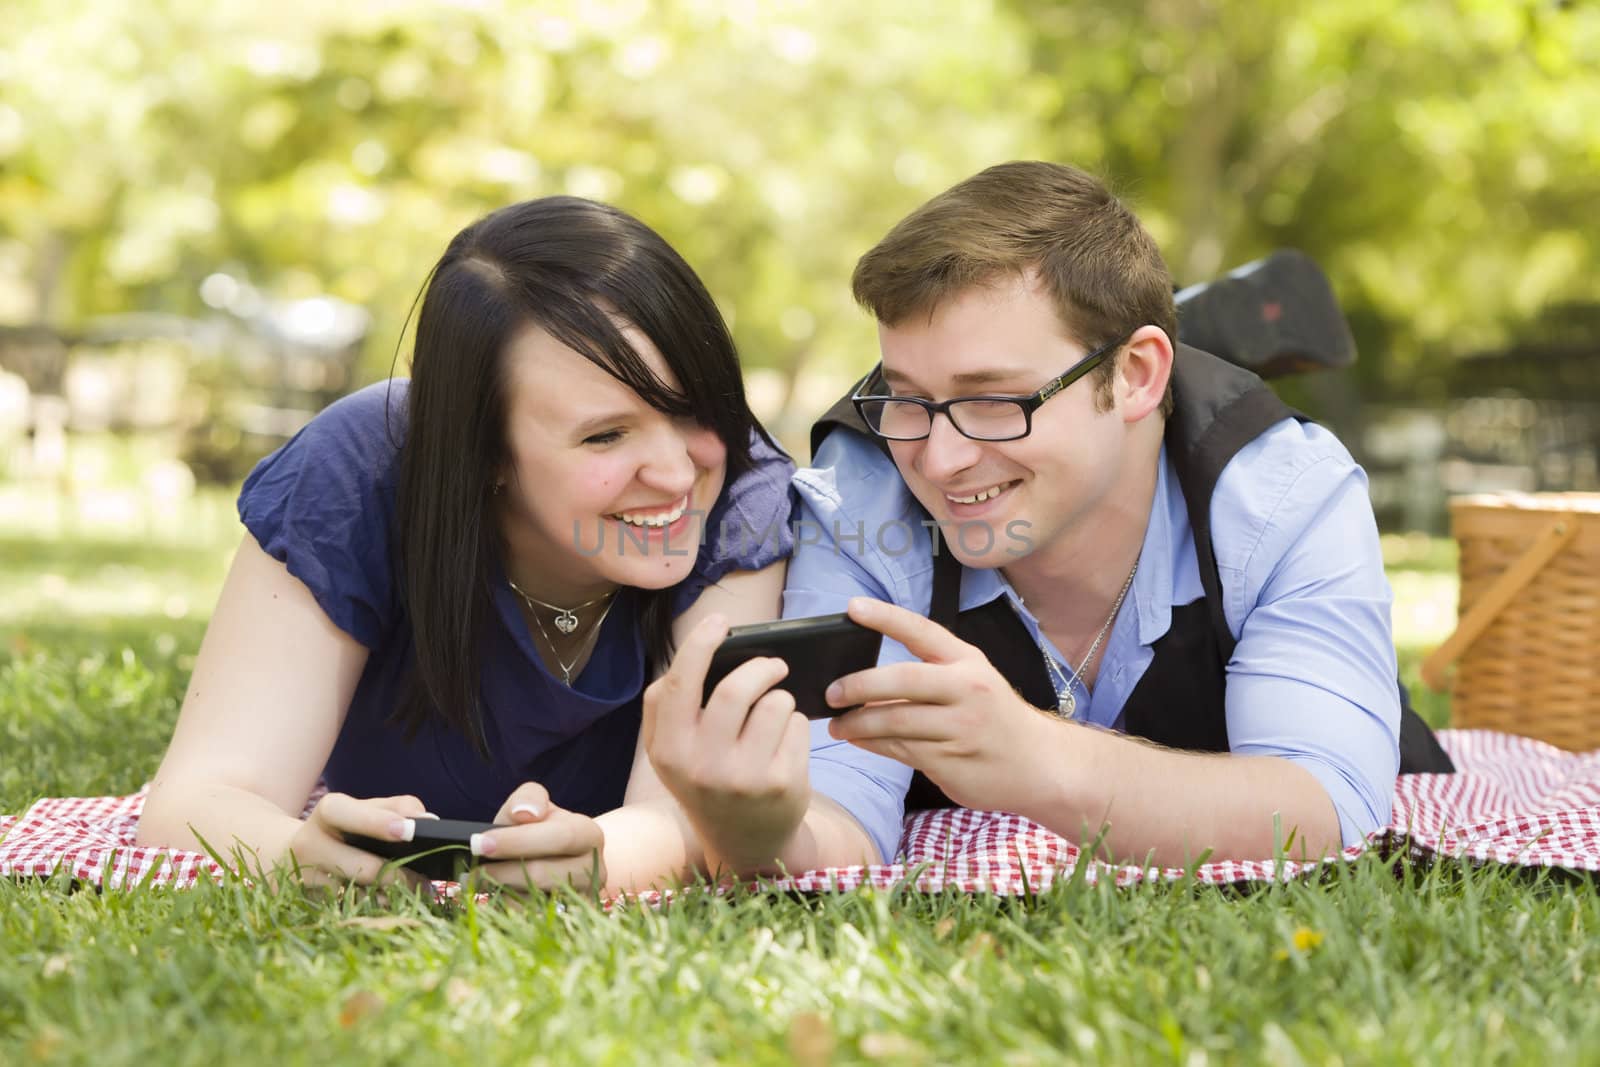 Young Couple at Park Texting Together by Feverpitched